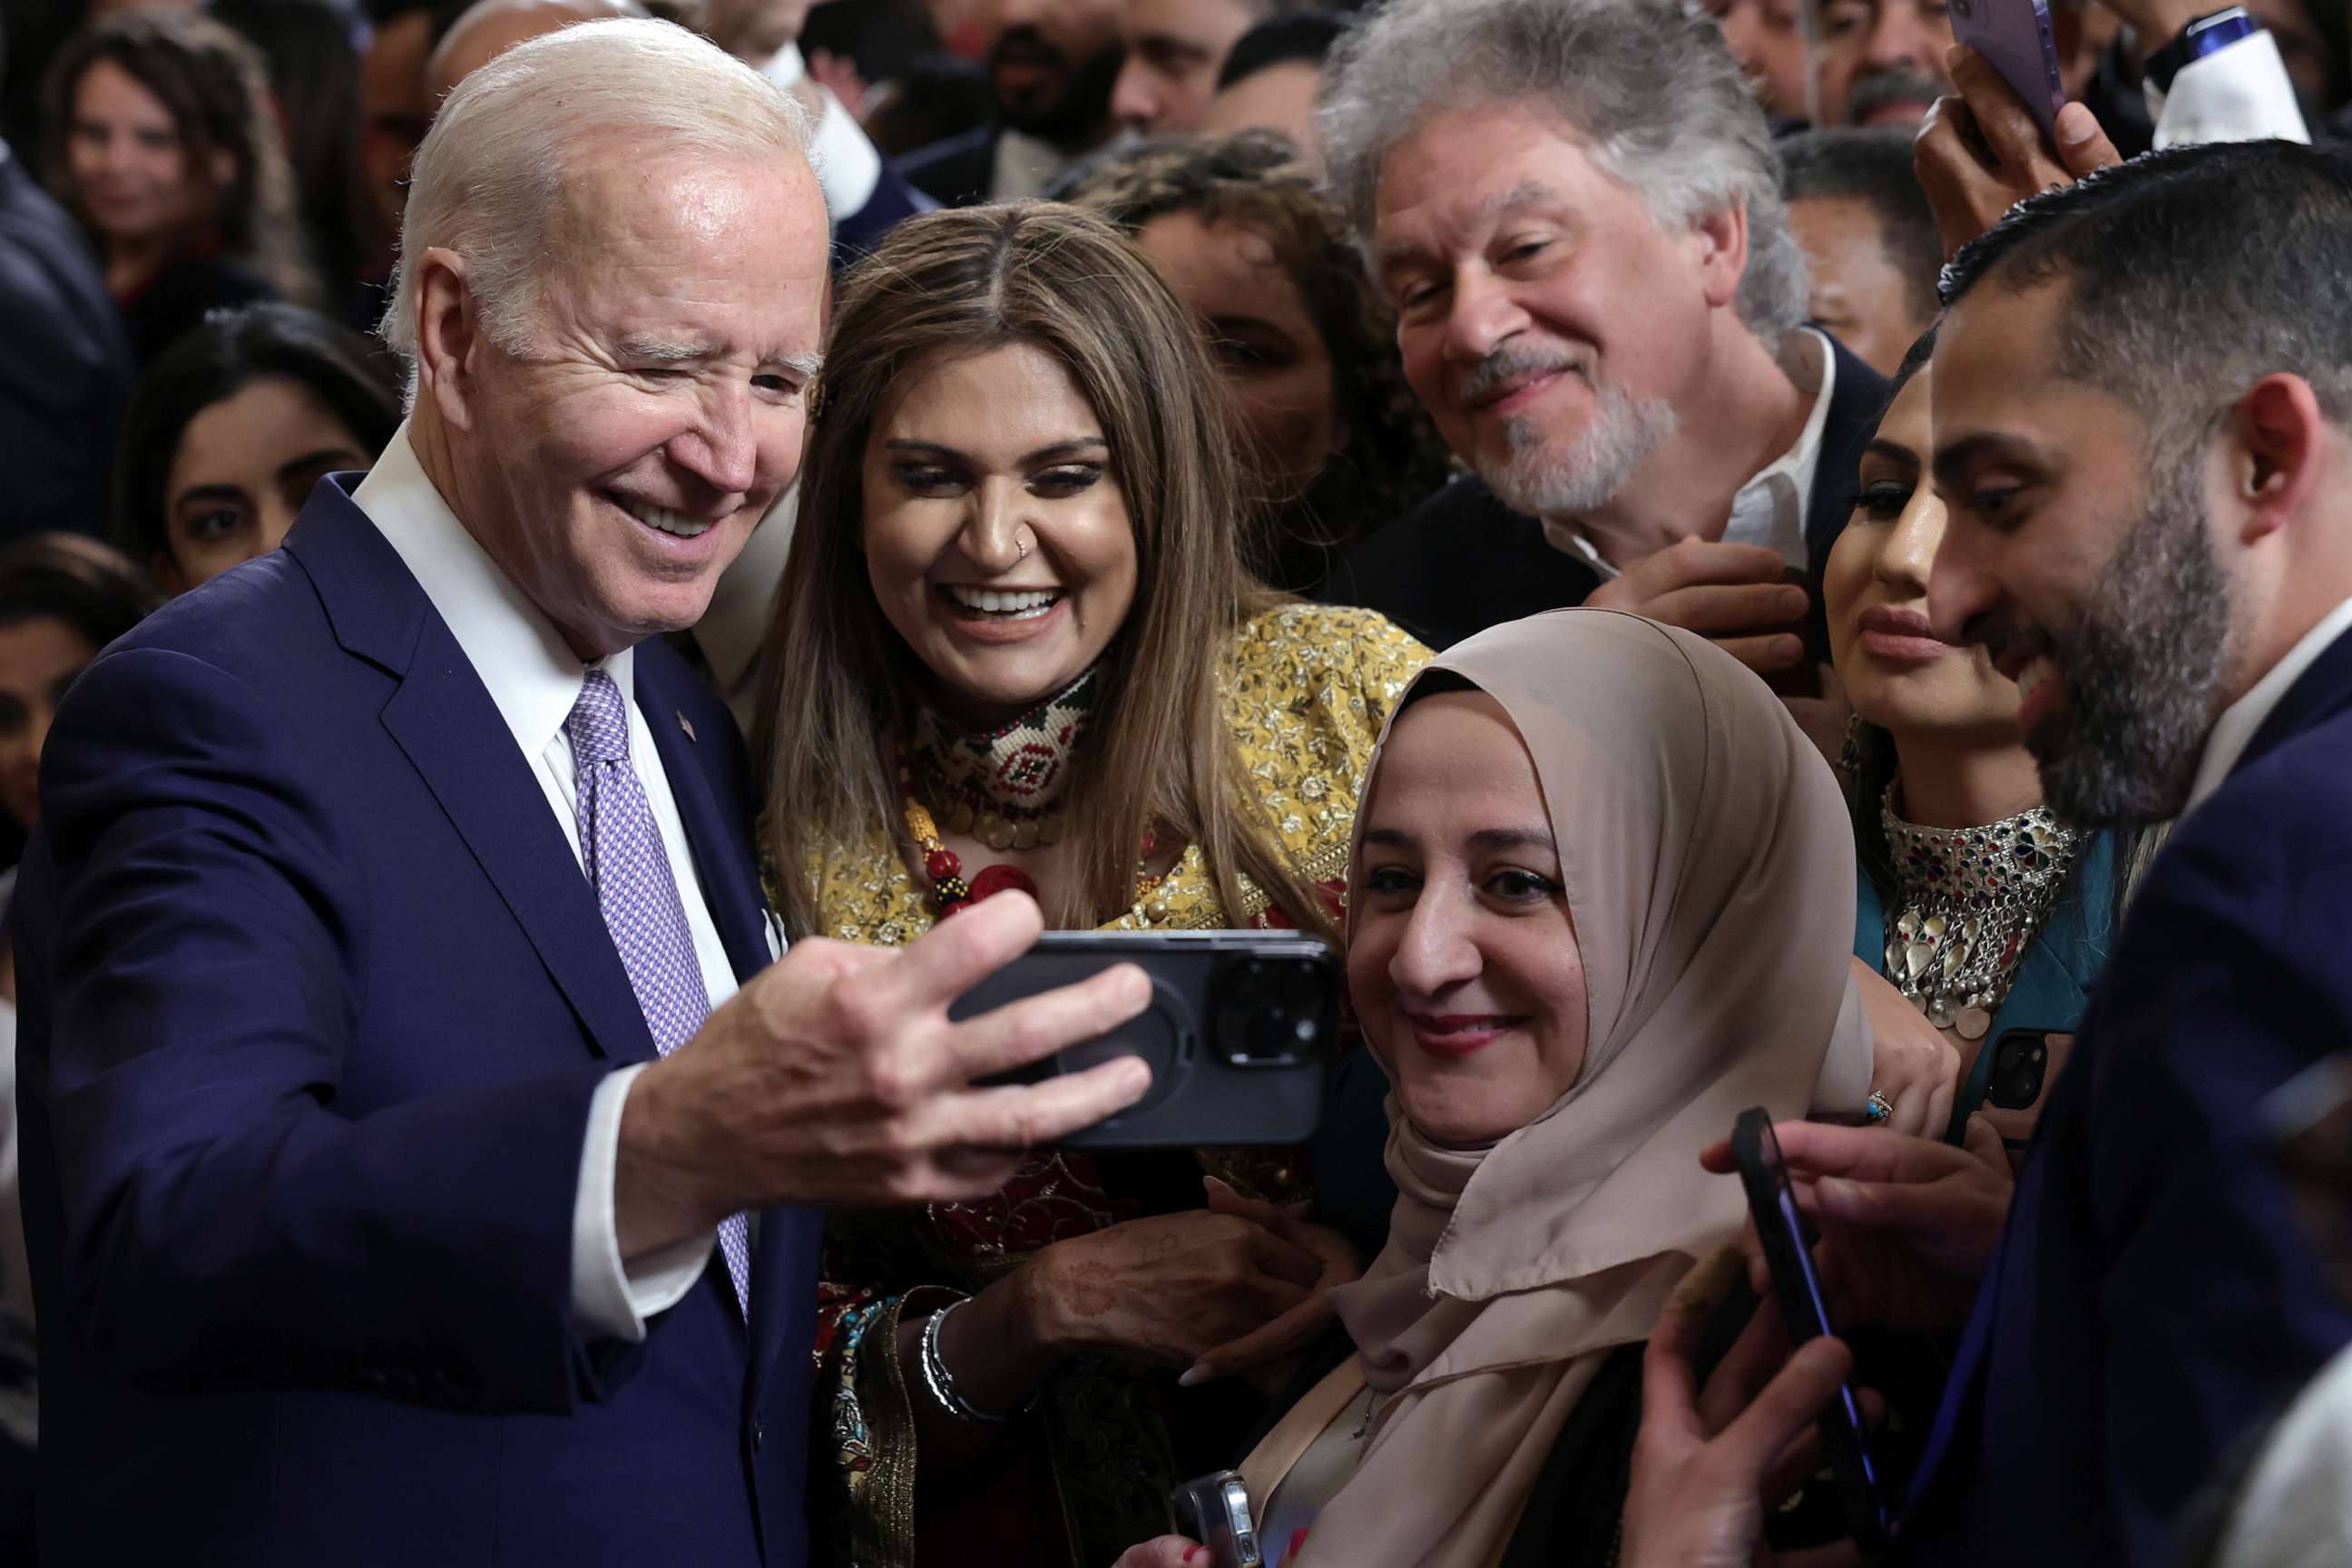 PHOTO: President Joe Bidentakes selfies with guests during a reception celebrating Eid-al-Fitr in the East Room of the White House, May 1, 2023.